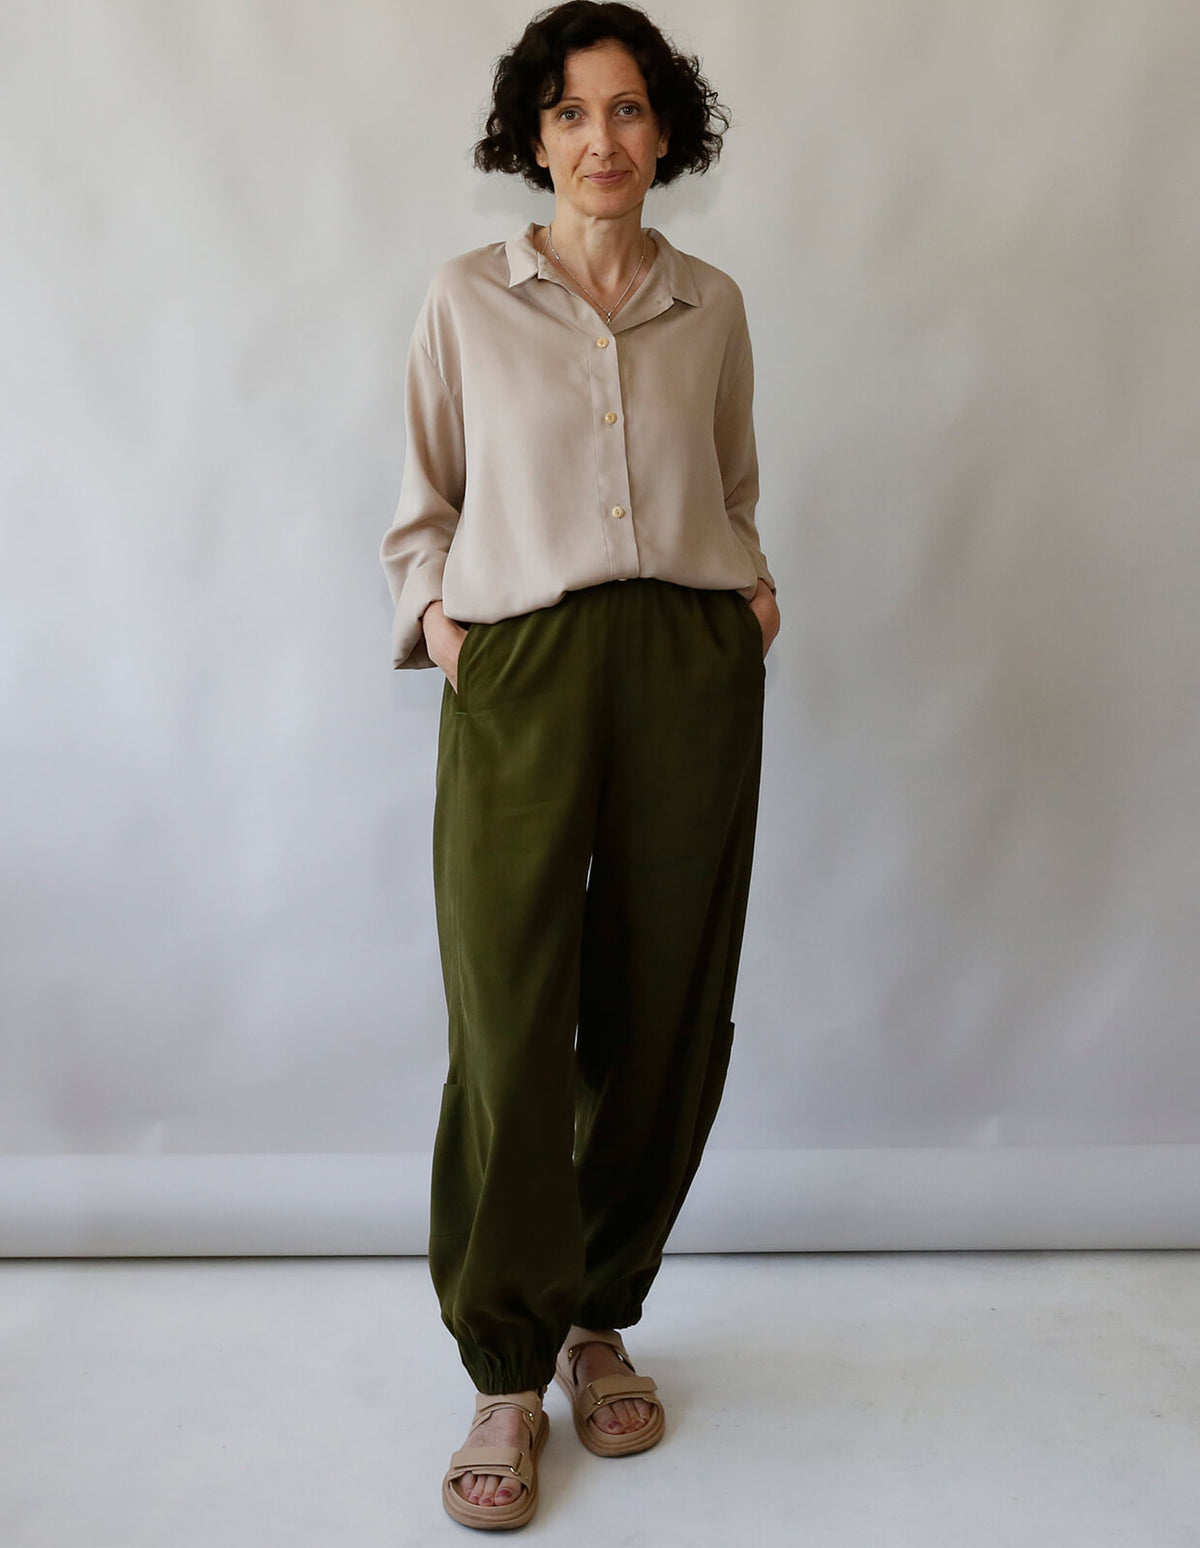 The Utility Pant and Skirt